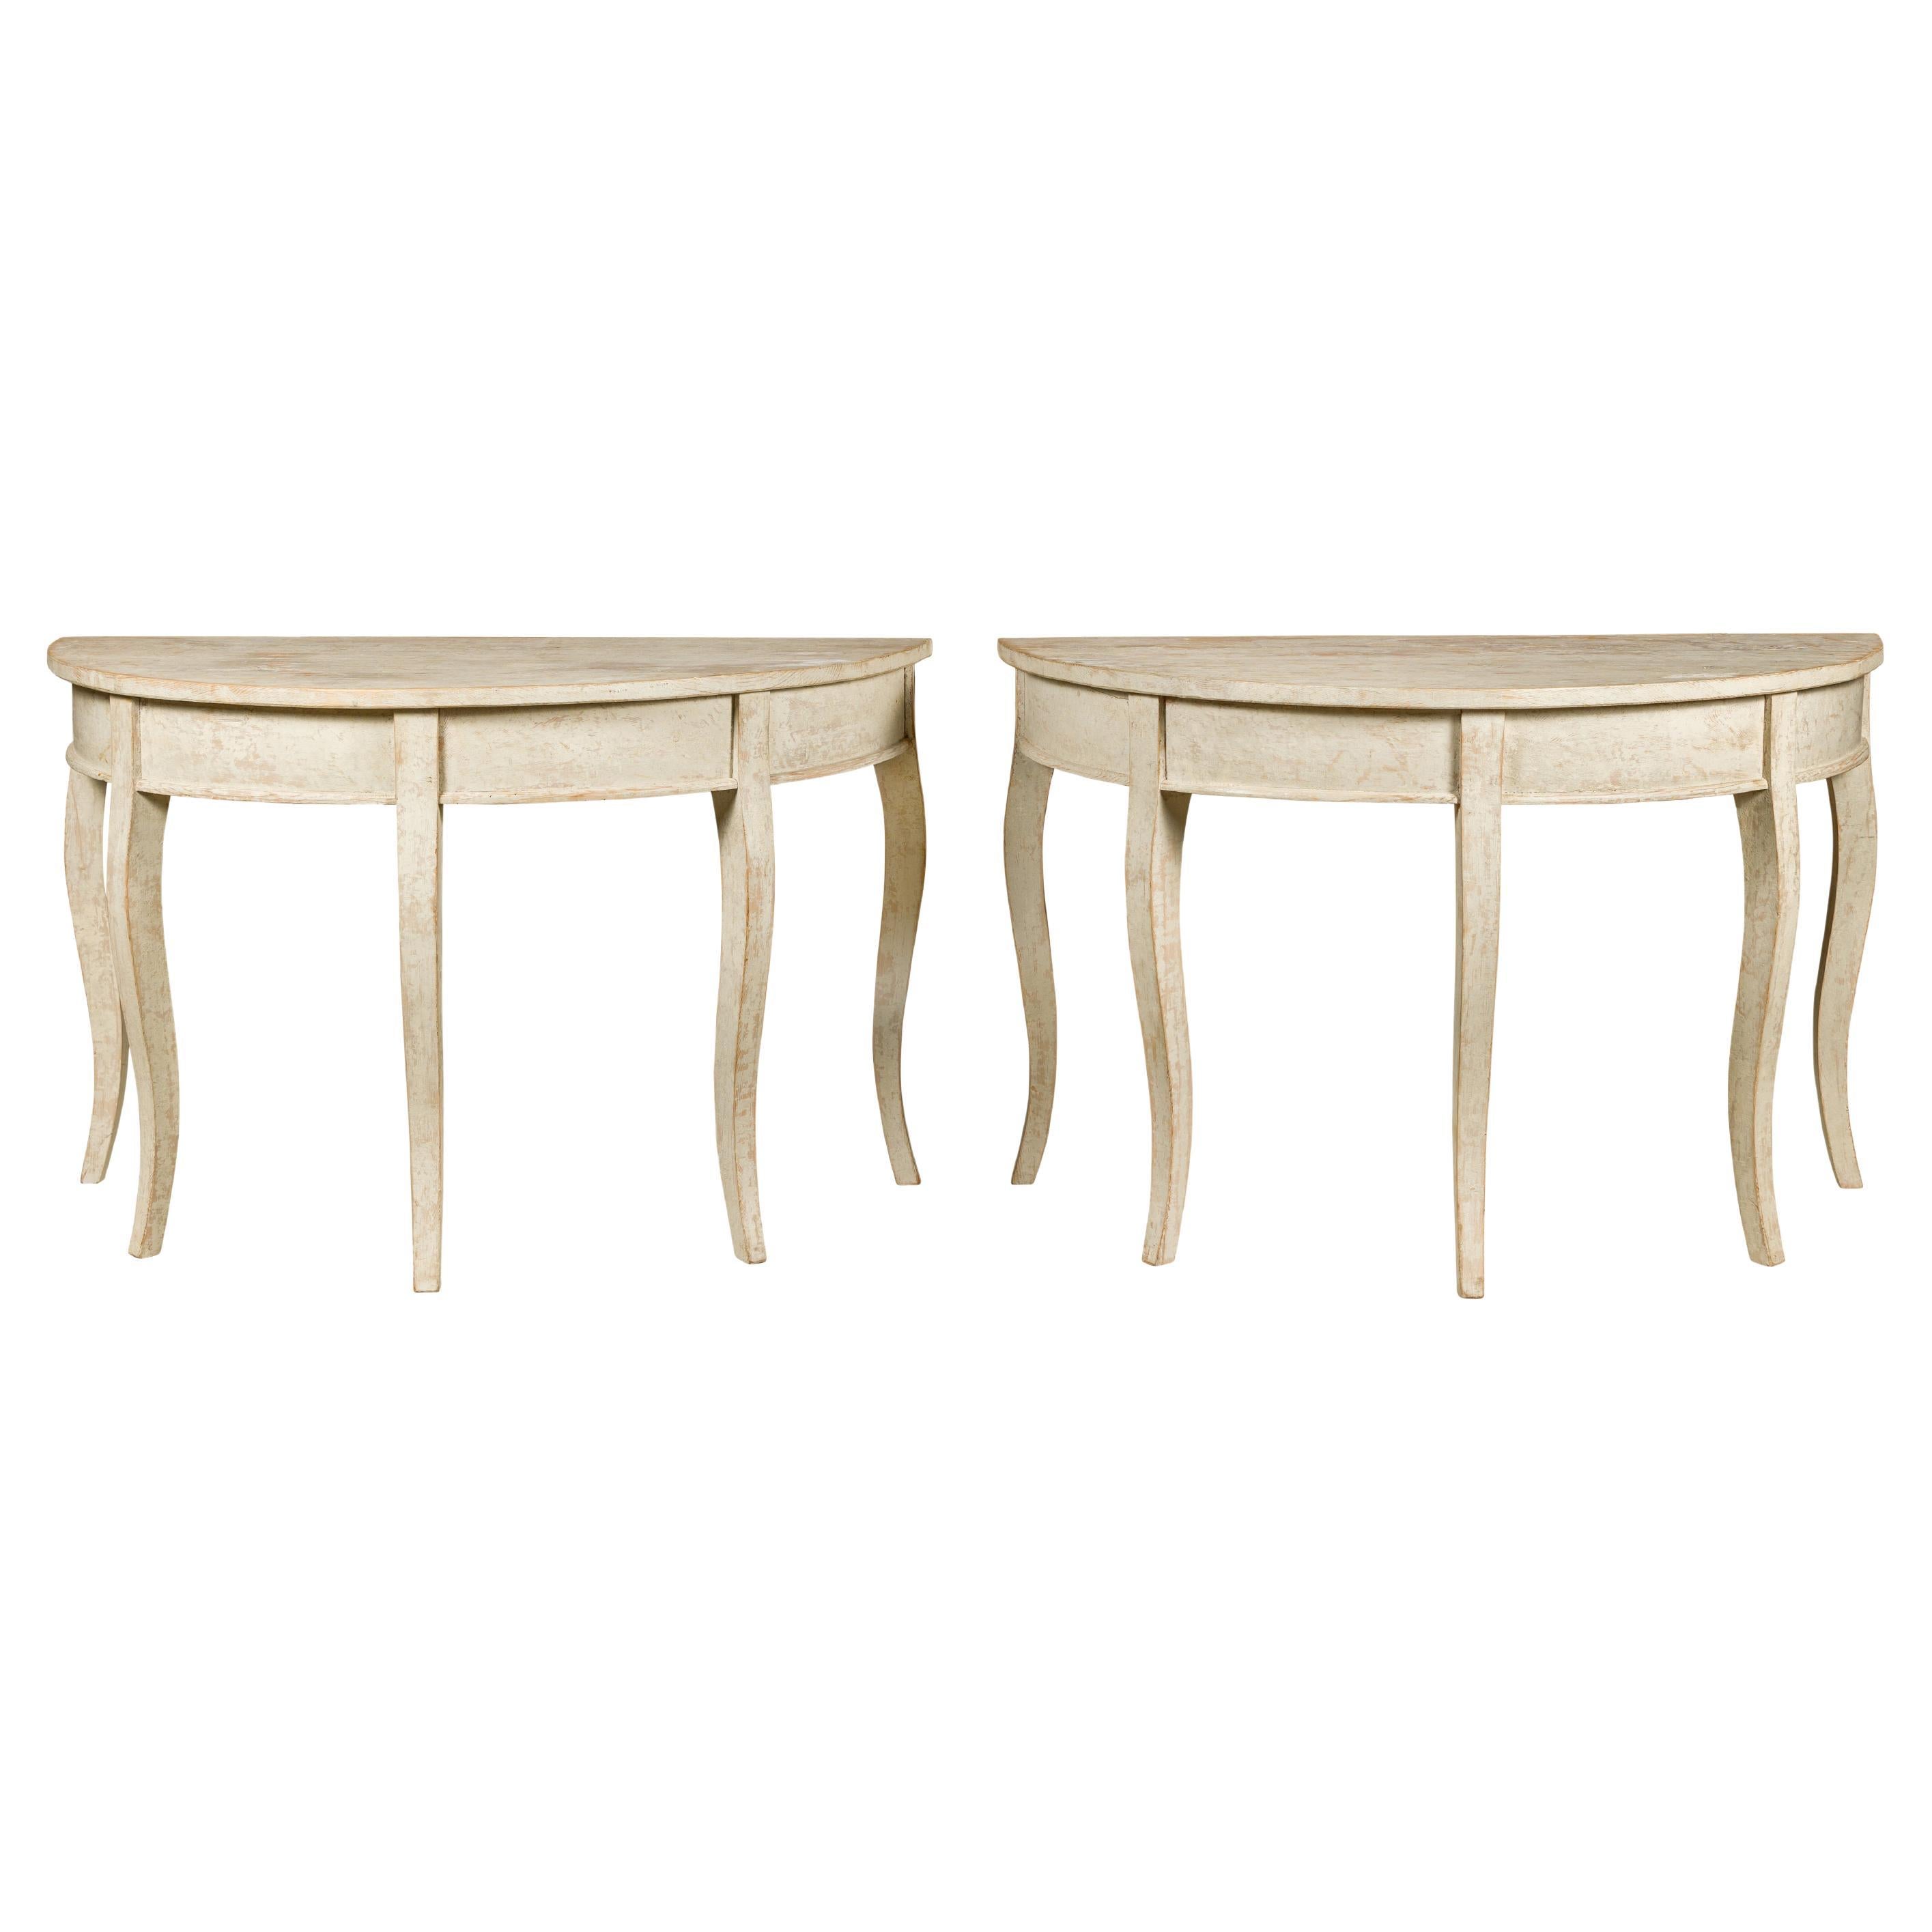 Swedish 19th Century Painted Demilune Tables with Cabriole Legs, a Pair For Sale